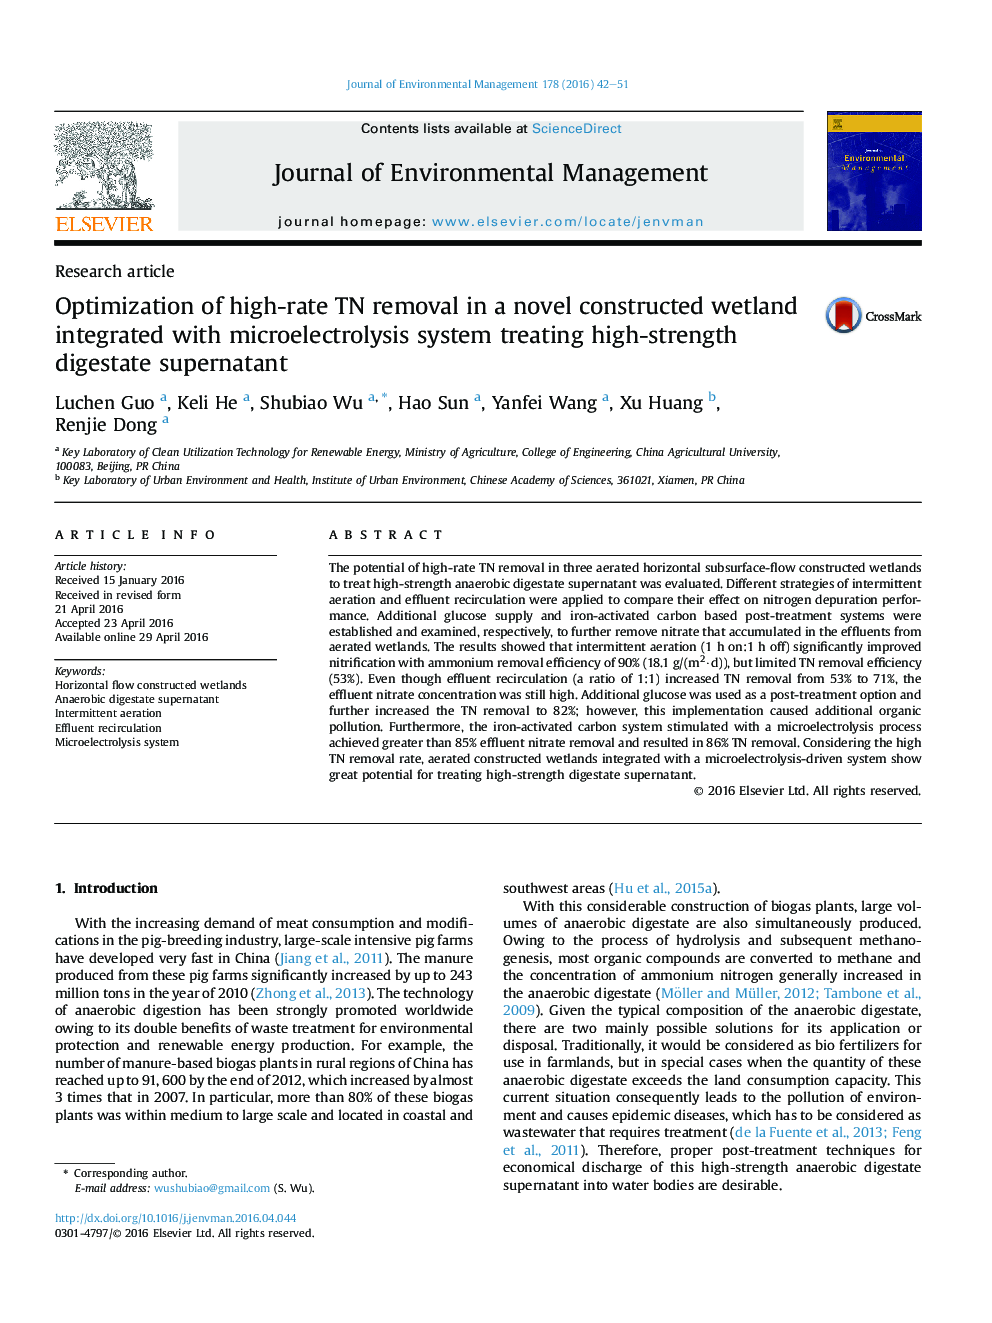 Optimization of high-rate TN removal in a novel constructed wetland integrated with microelectrolysis system treating high-strength digestate supernatant